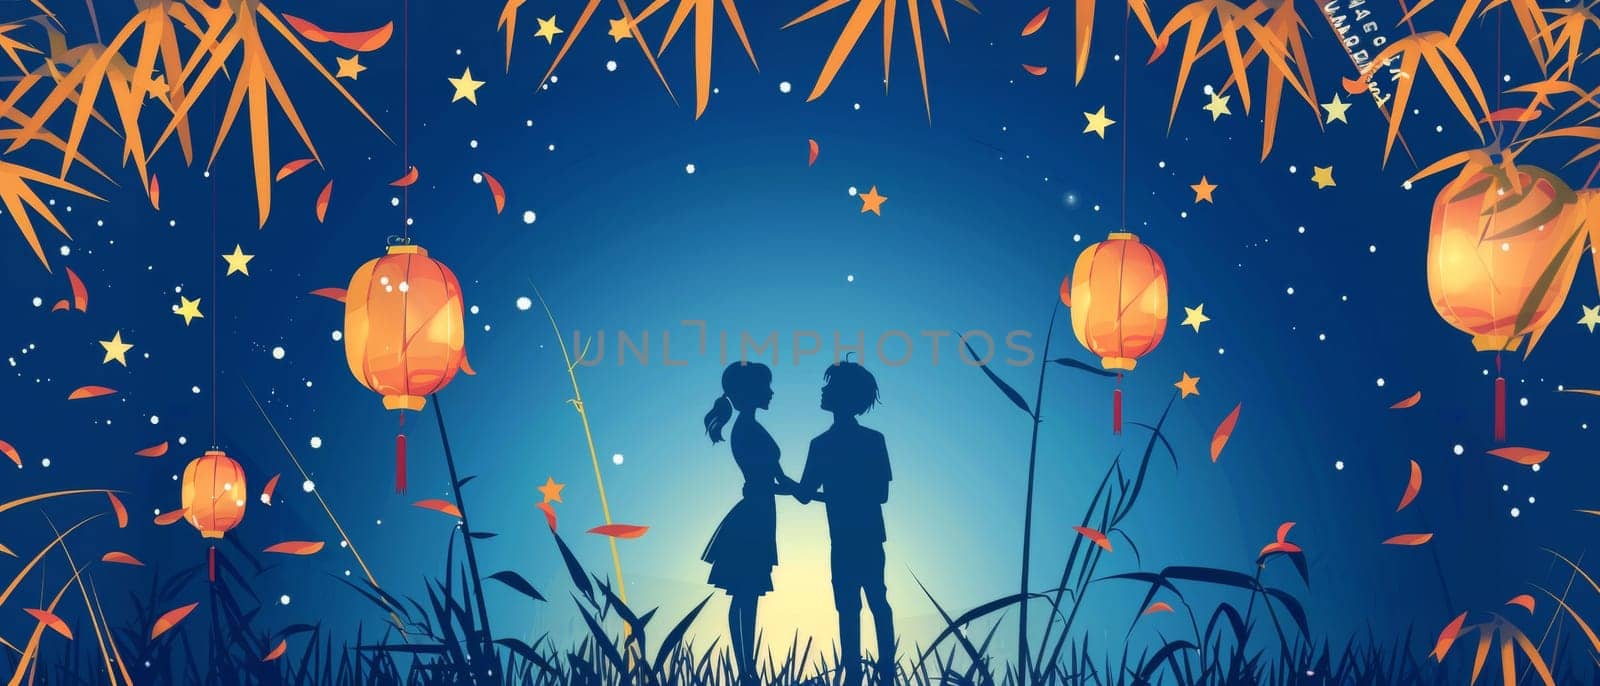 A whimsical scene of two children playing under lantern-lit skies, with falling leaves and a backdrop of bamboo. by sfinks